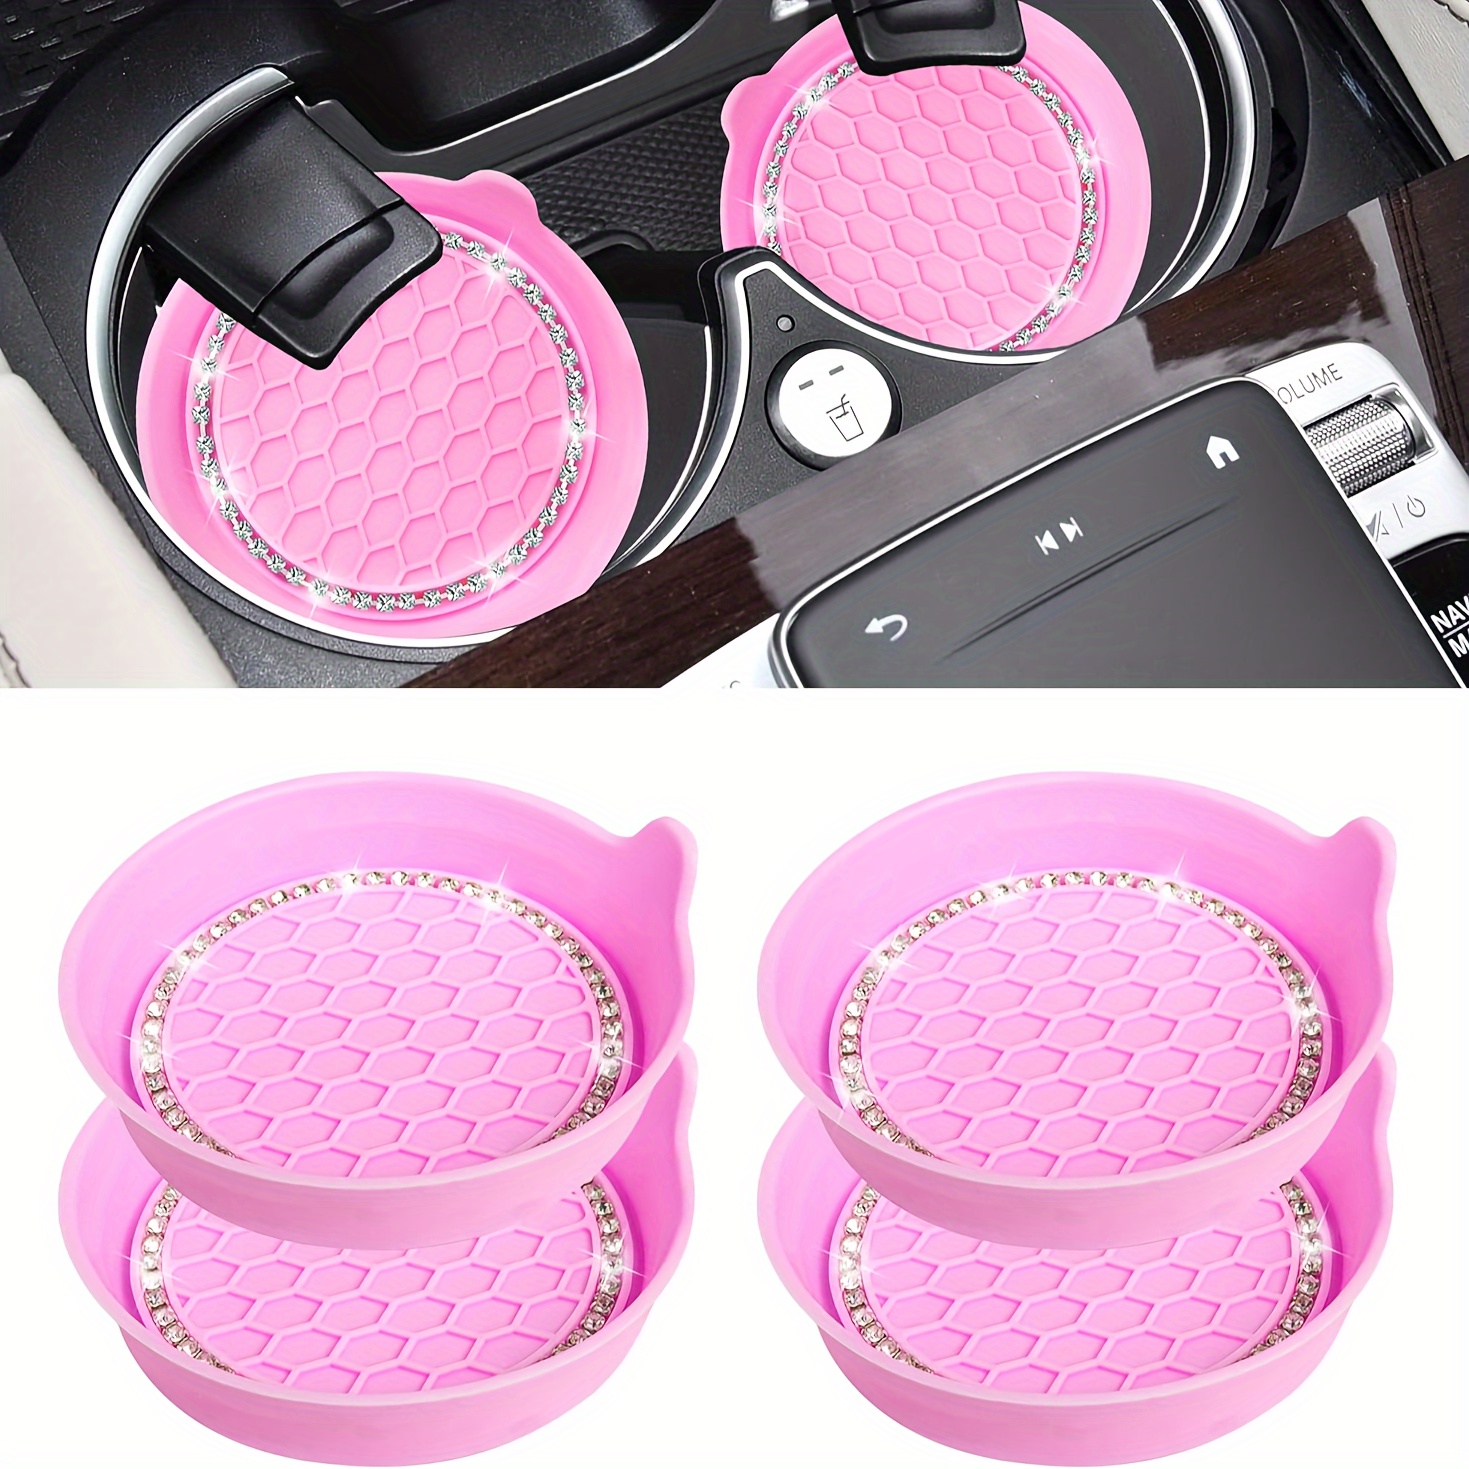 

4 Packs Silicone Non-slip Insert Coasters, Car Cup Holder Coasters, Universal Vehicle Interior Accessories For Women Girls